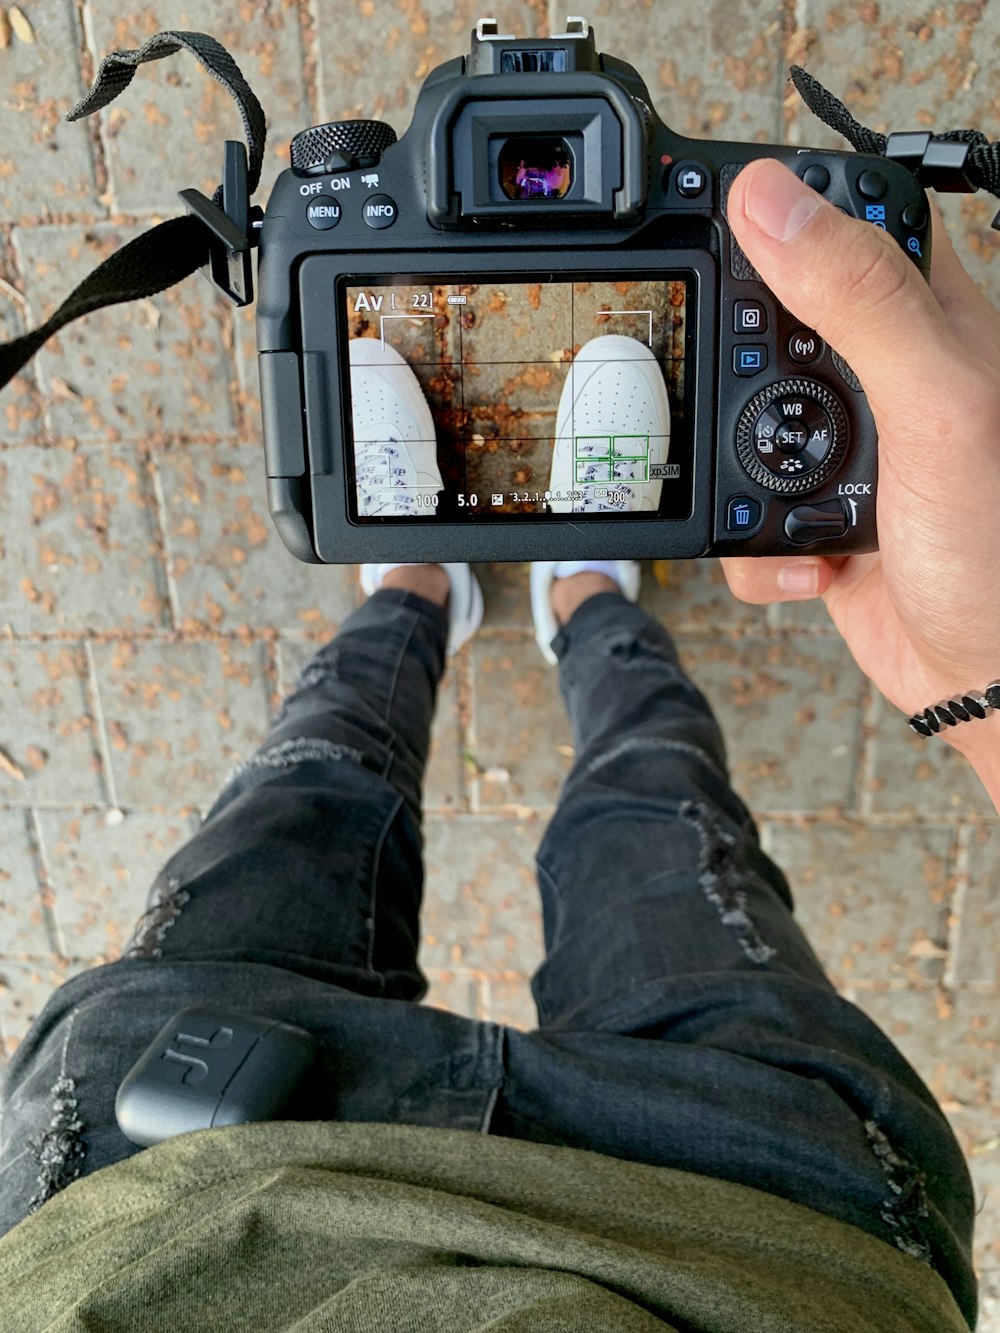 person using DSLR camera and taking photo of white sneakers